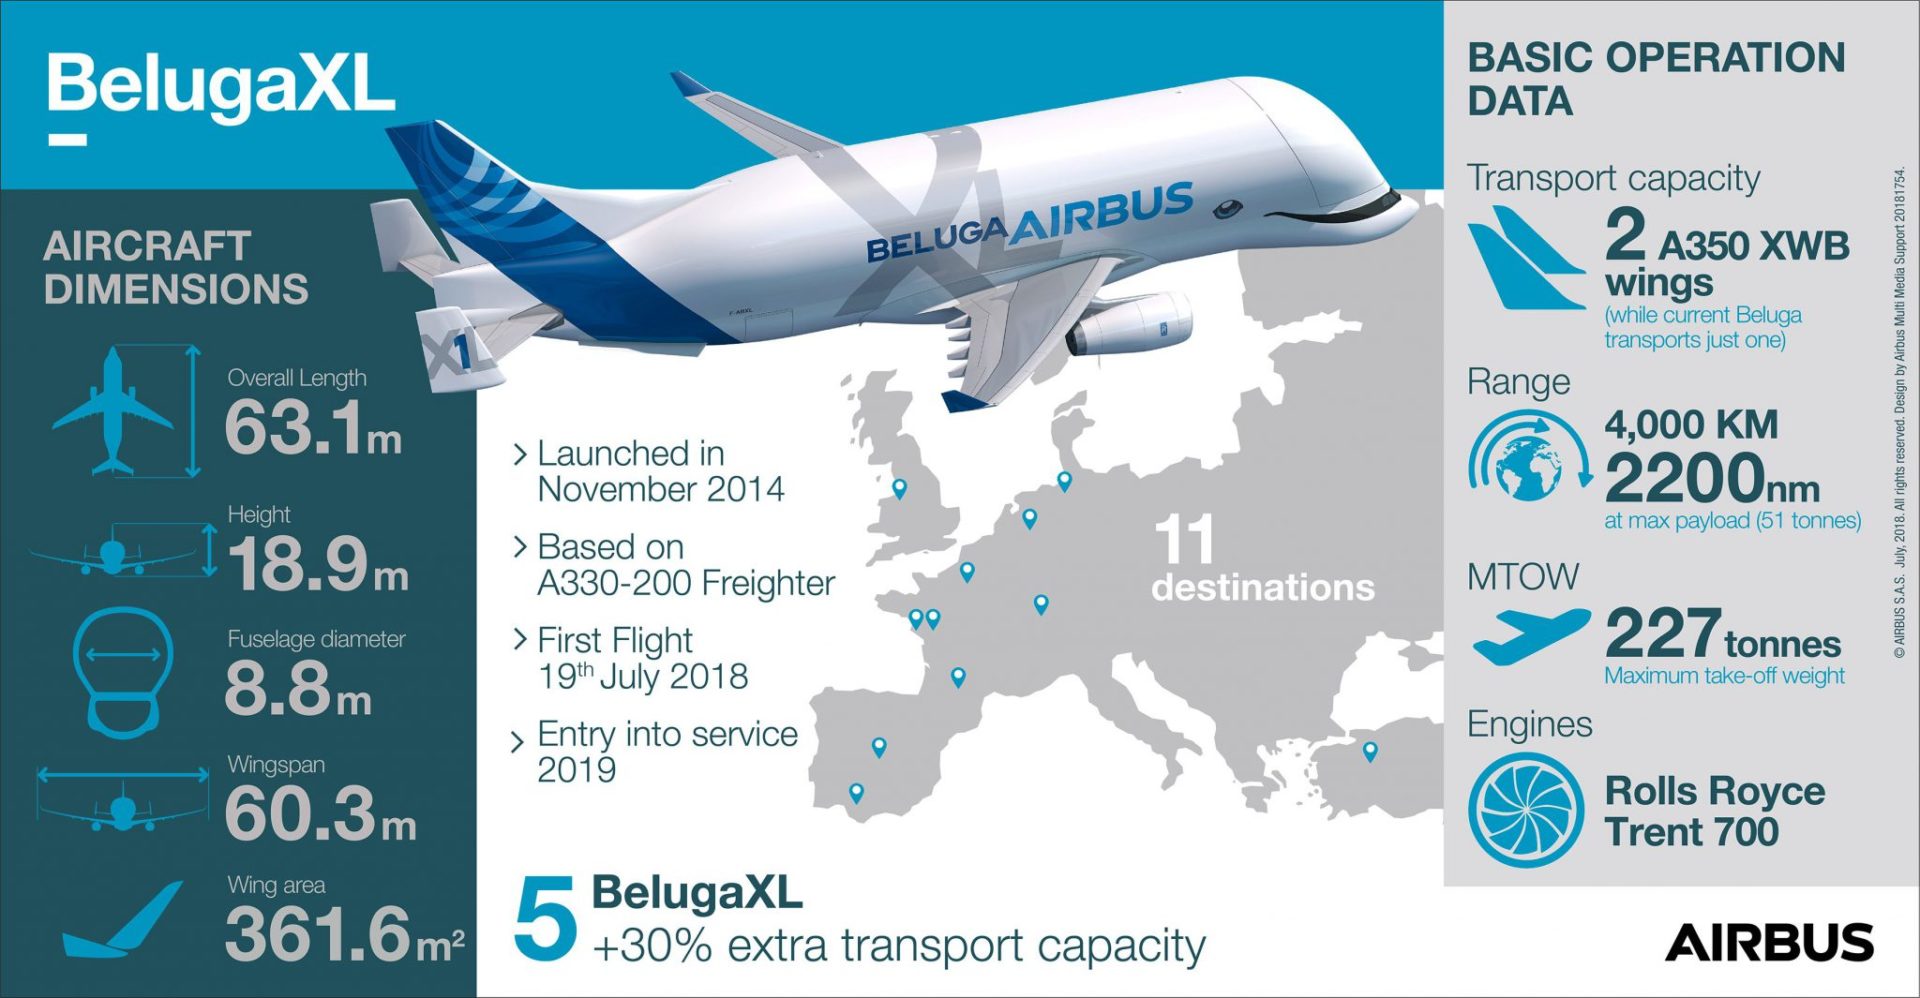 About the Beluga XL